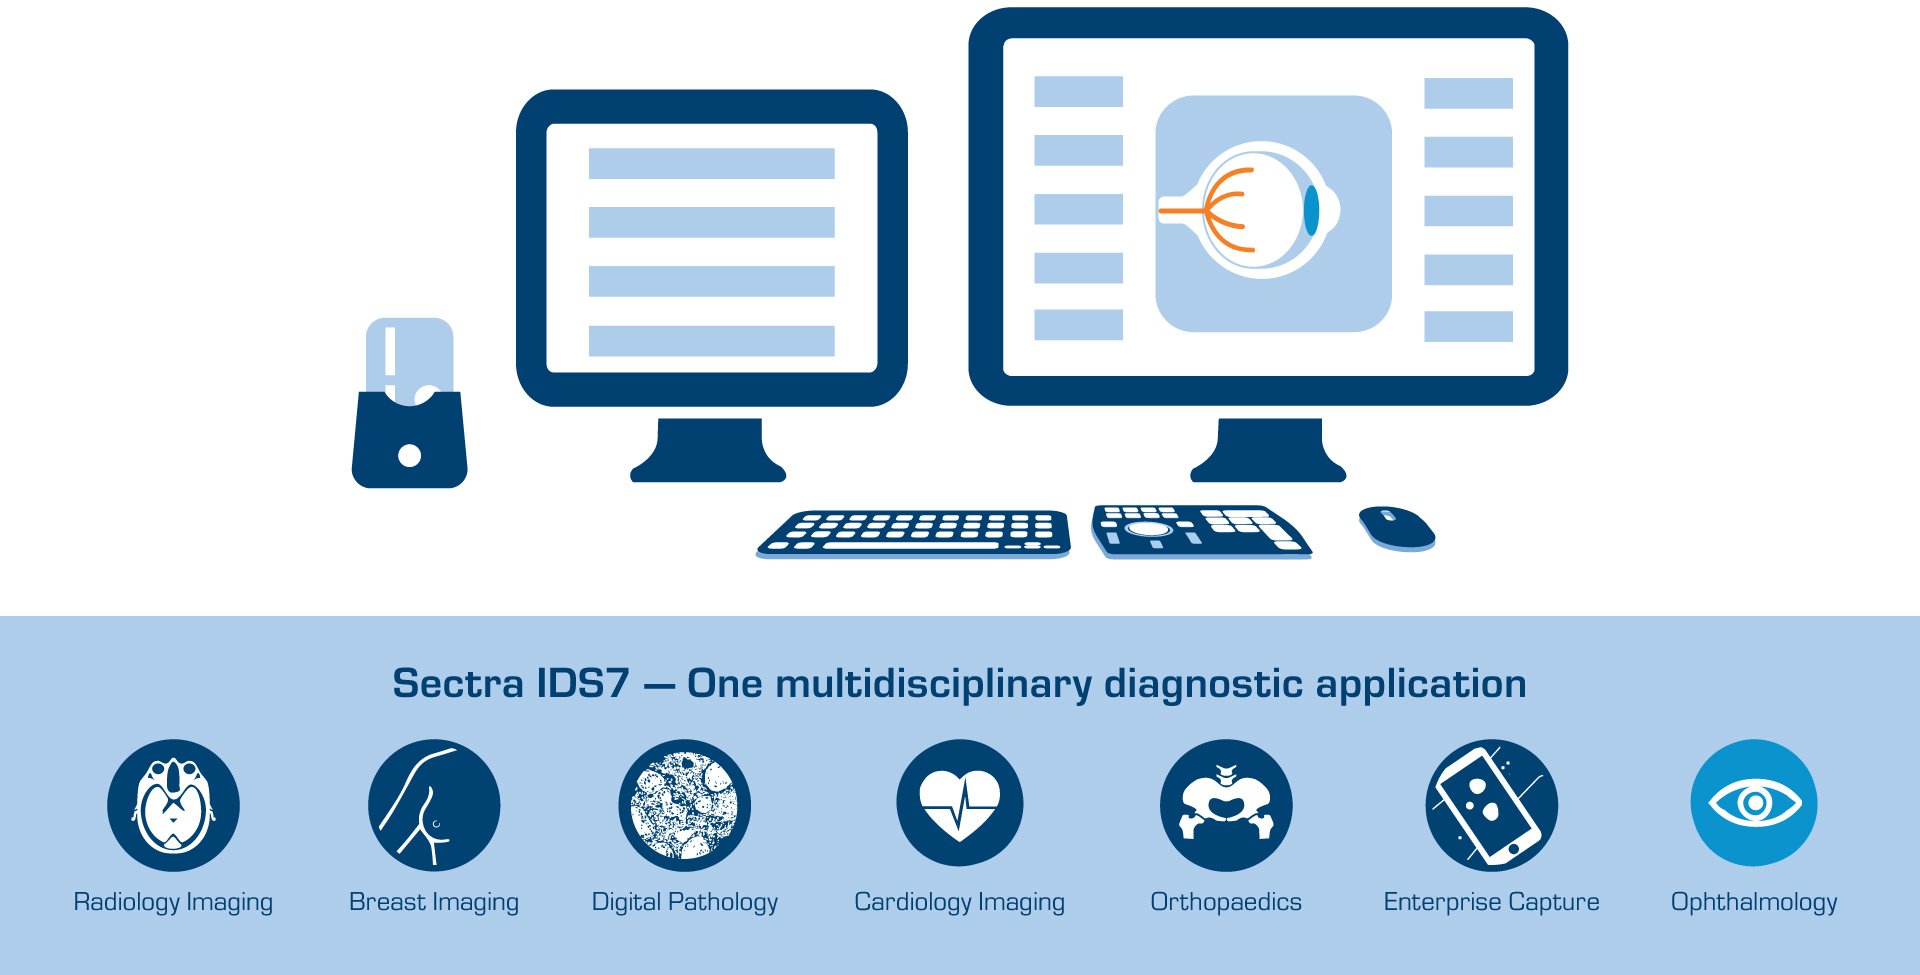 Illustration of an IDS7 workstation for ophthalmology